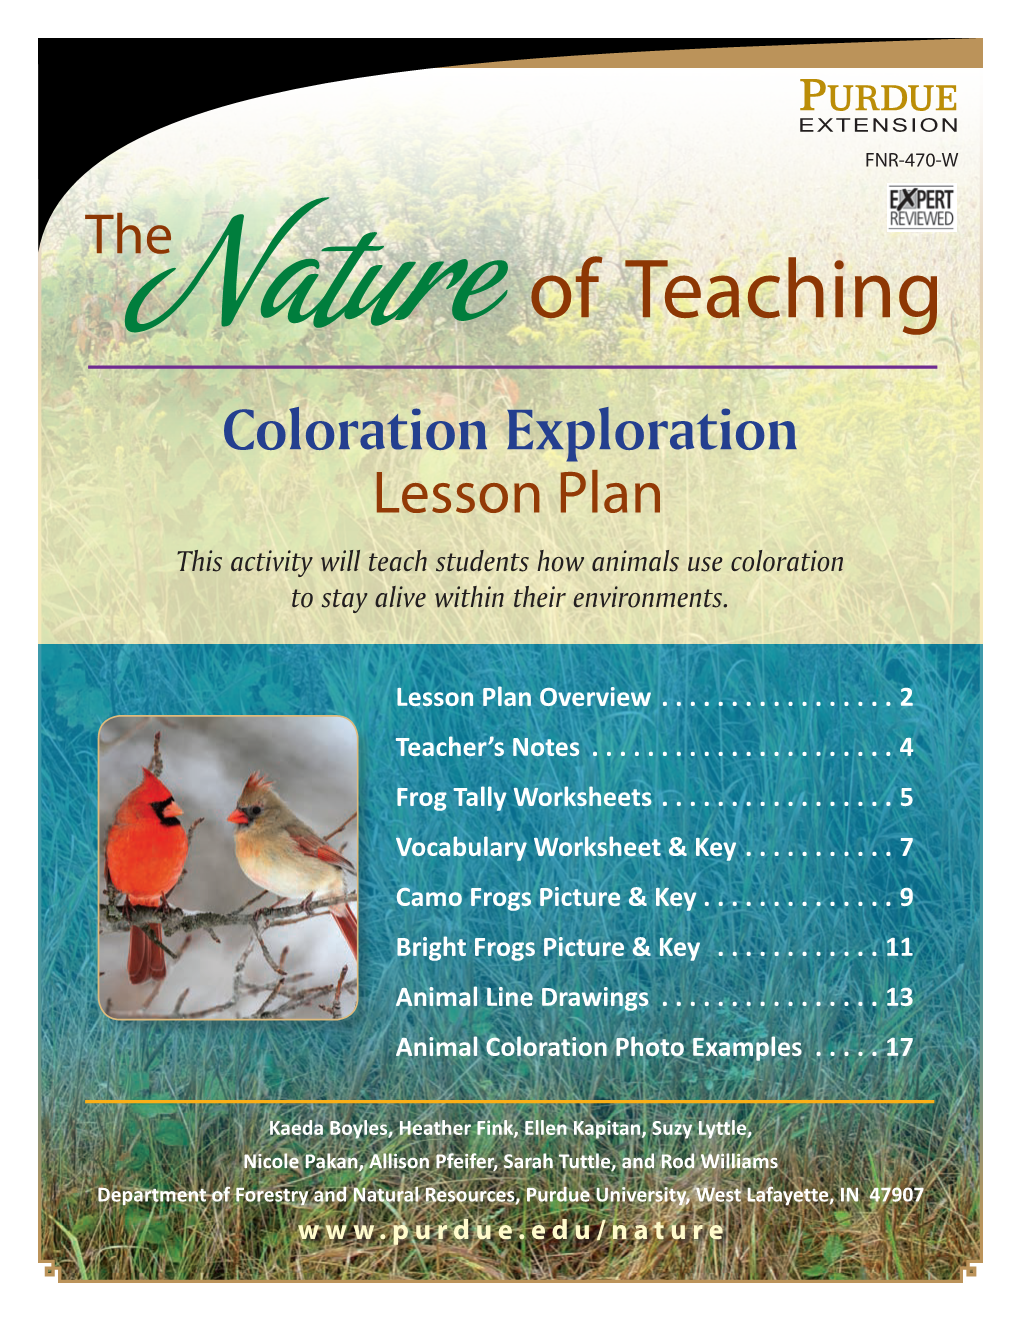 Coloration Exploration Lesson Plan This Activity Will Teach Students How Animals Use Coloration to Stay Alive Within Their Environments